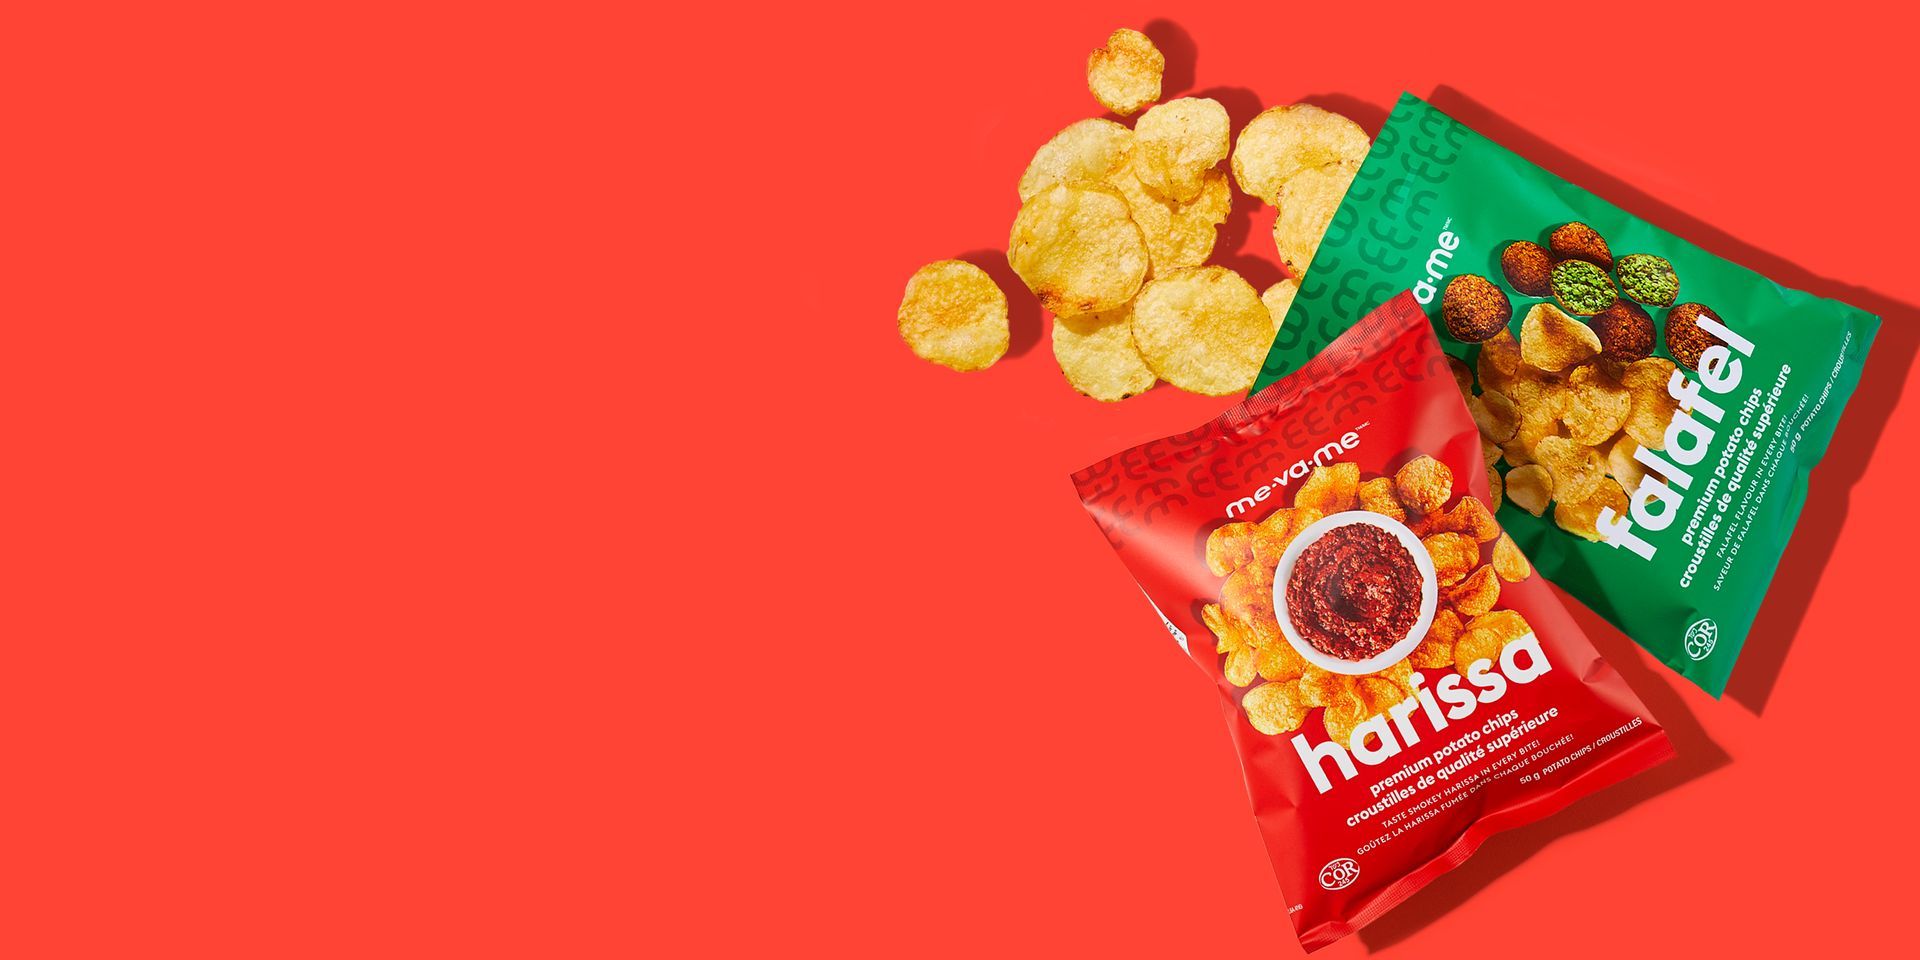 Two bags of food are sitting on top of each other on a red background.